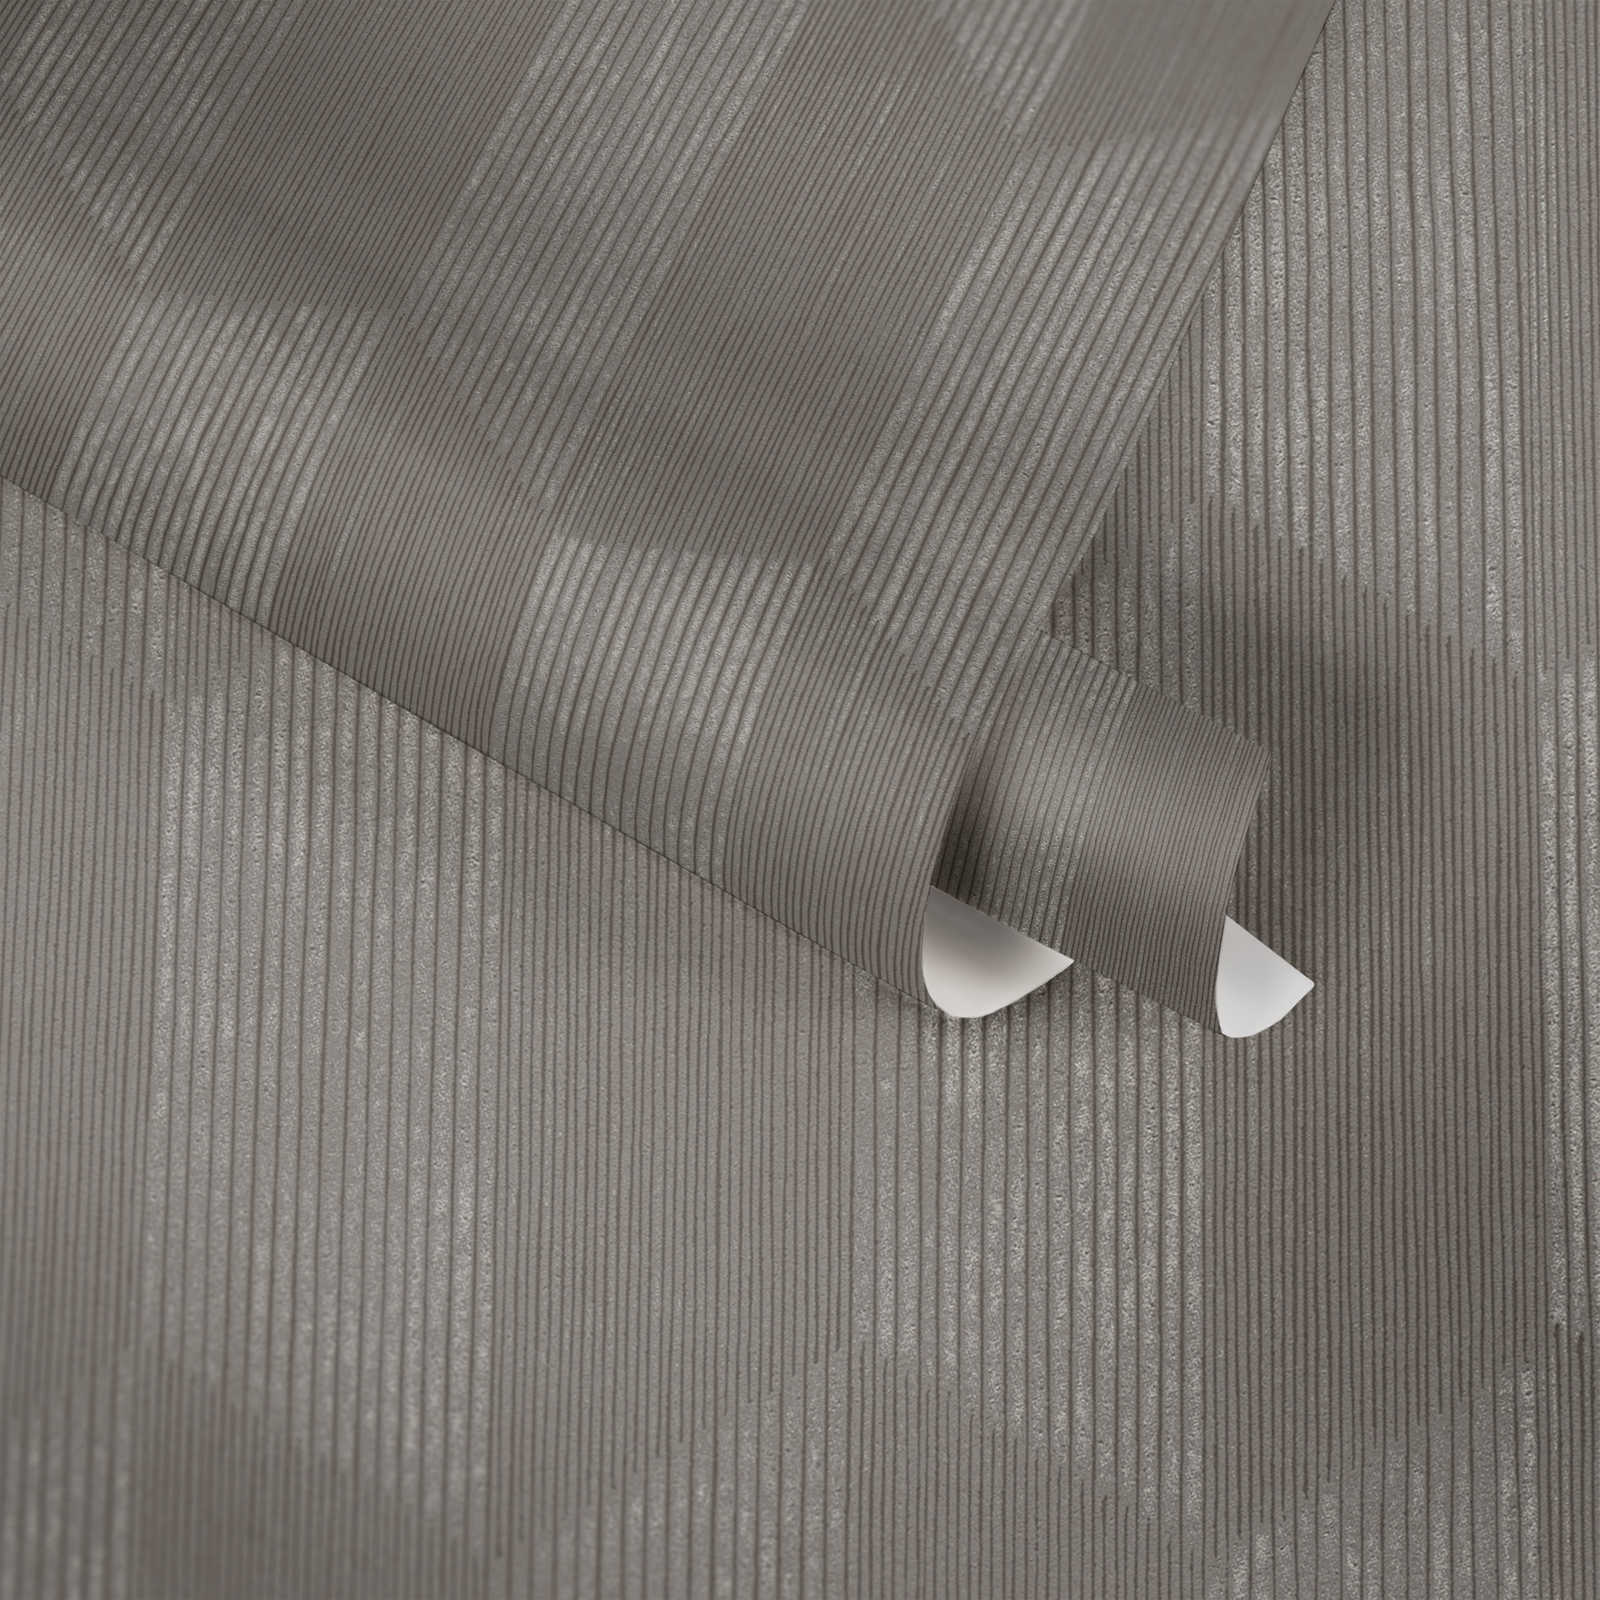             Textured wallpaper with 3D graphic pattern - grey, beige
        